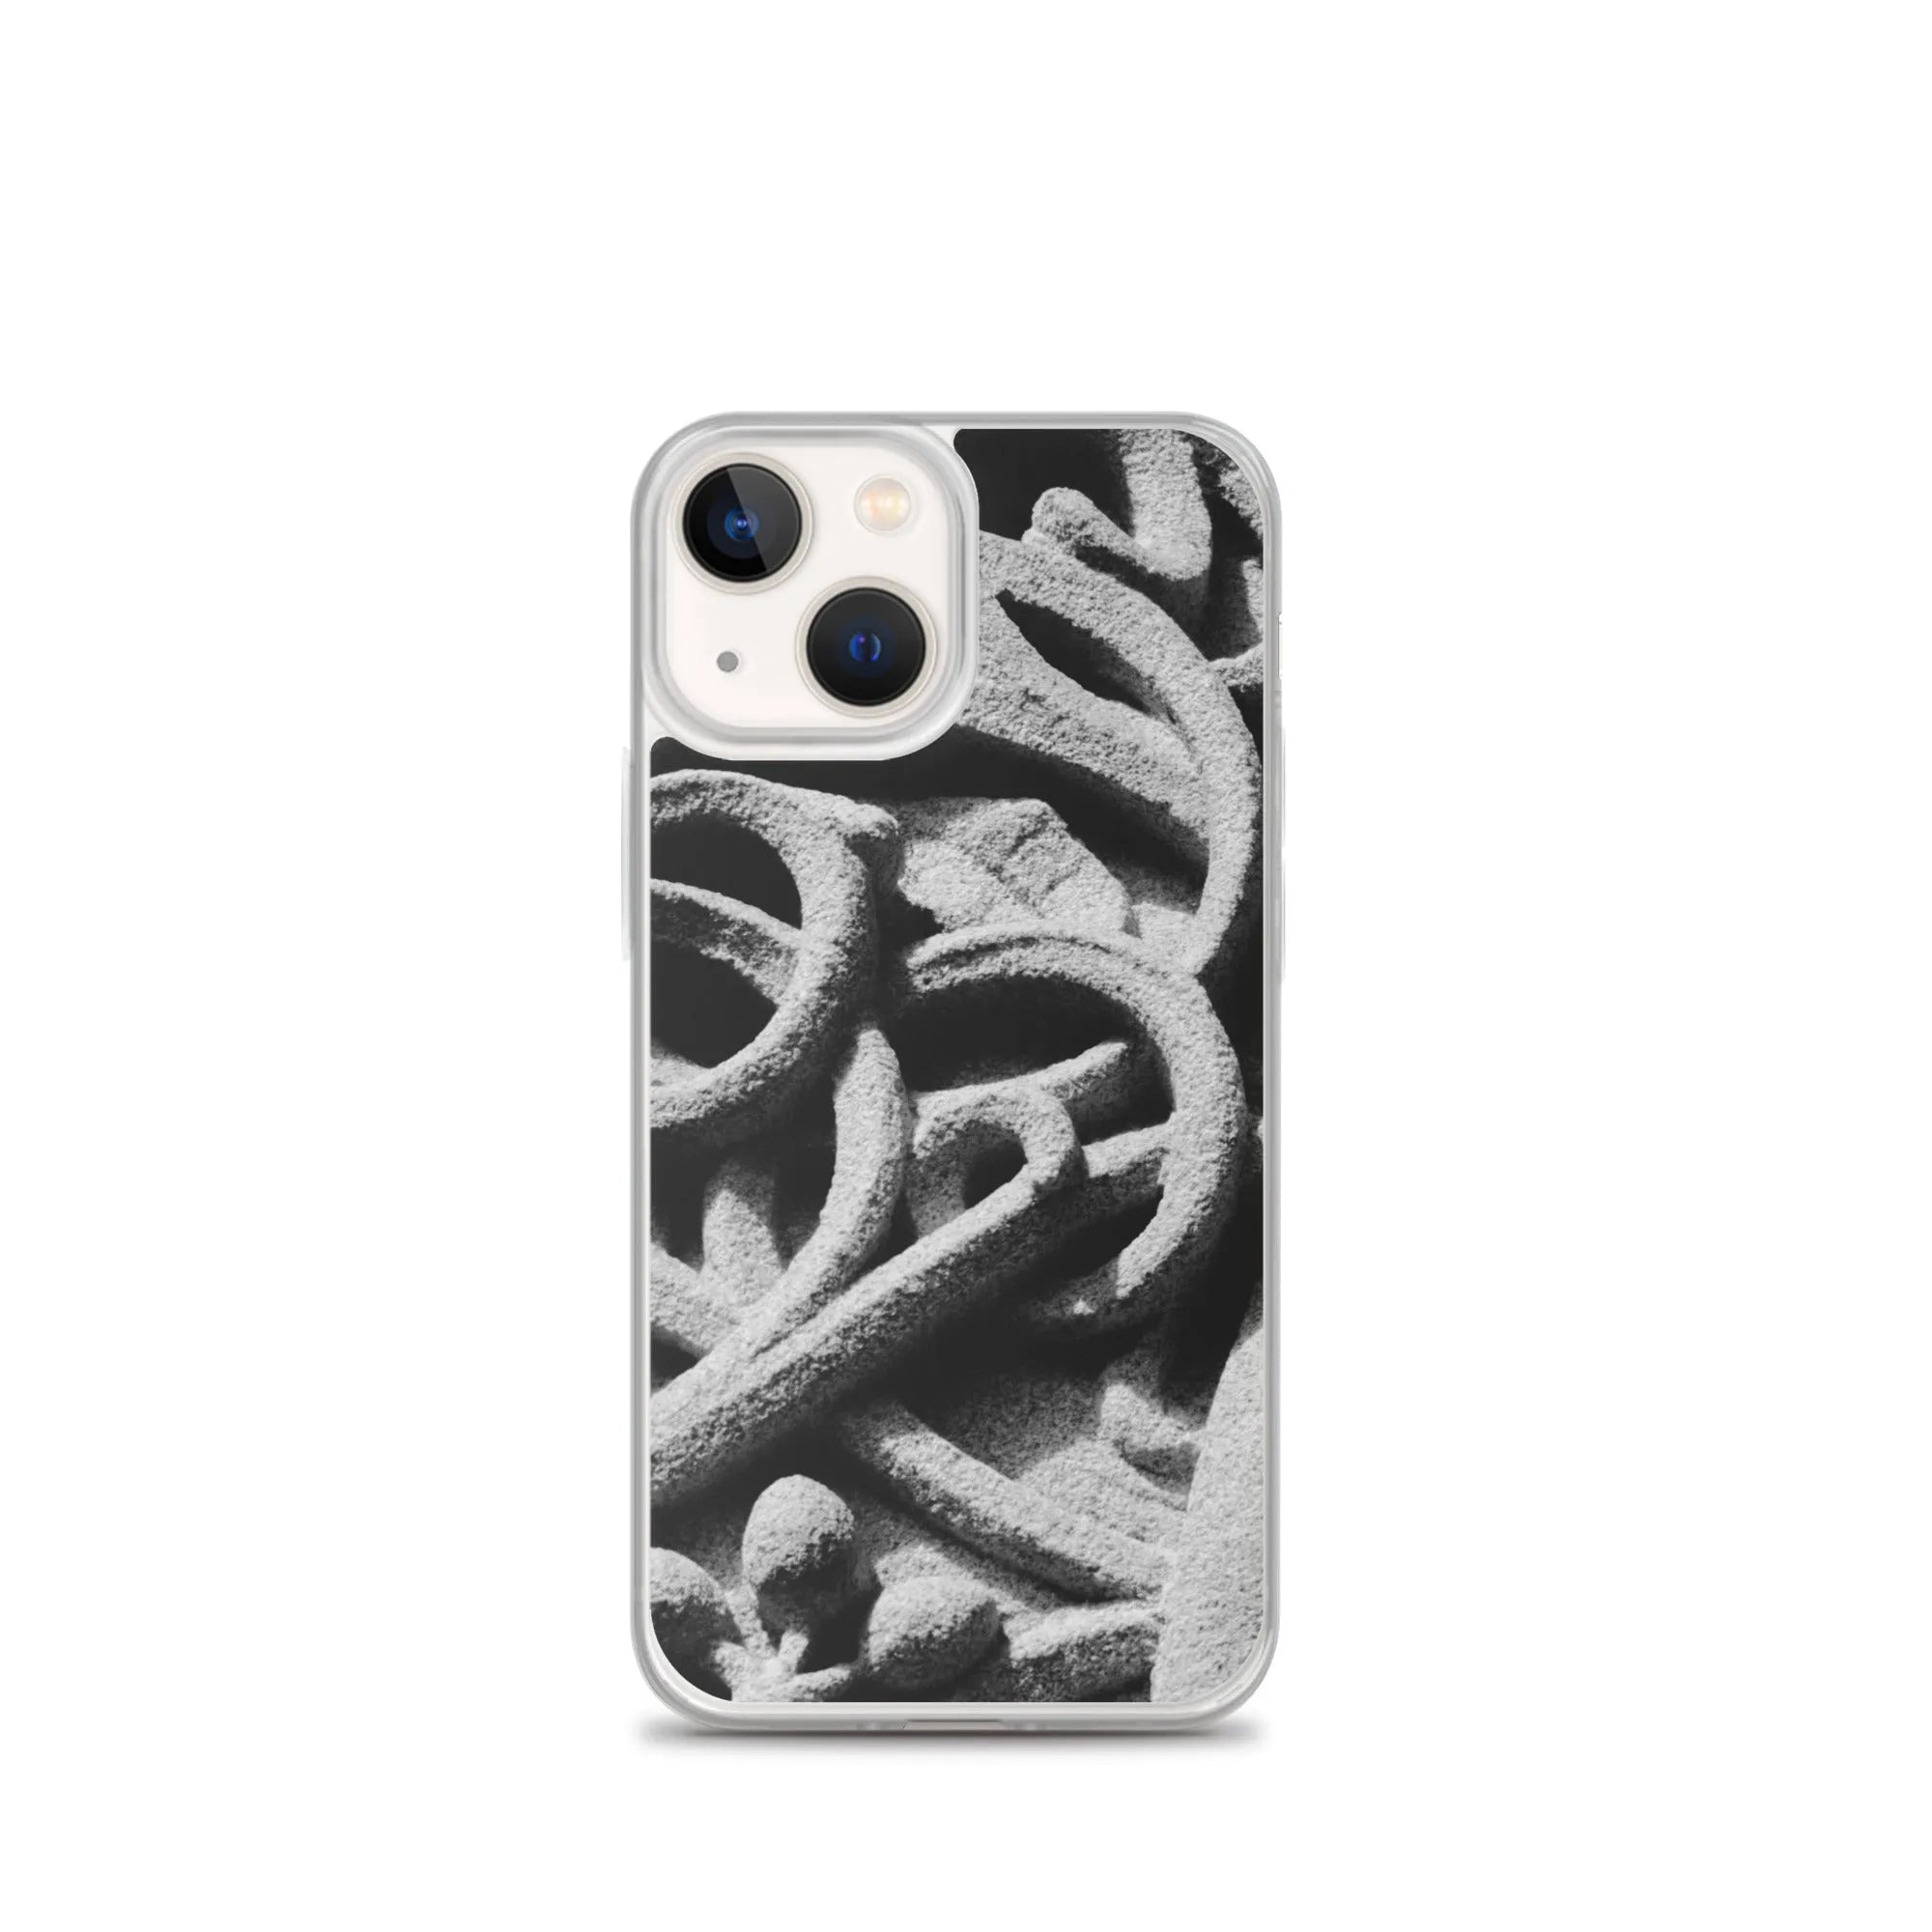 Labyrinth - Designer Travels Art Iphone Case - Black And White - Iphone 13 Mini - Mobile Phone Cases - Aesthetic Art